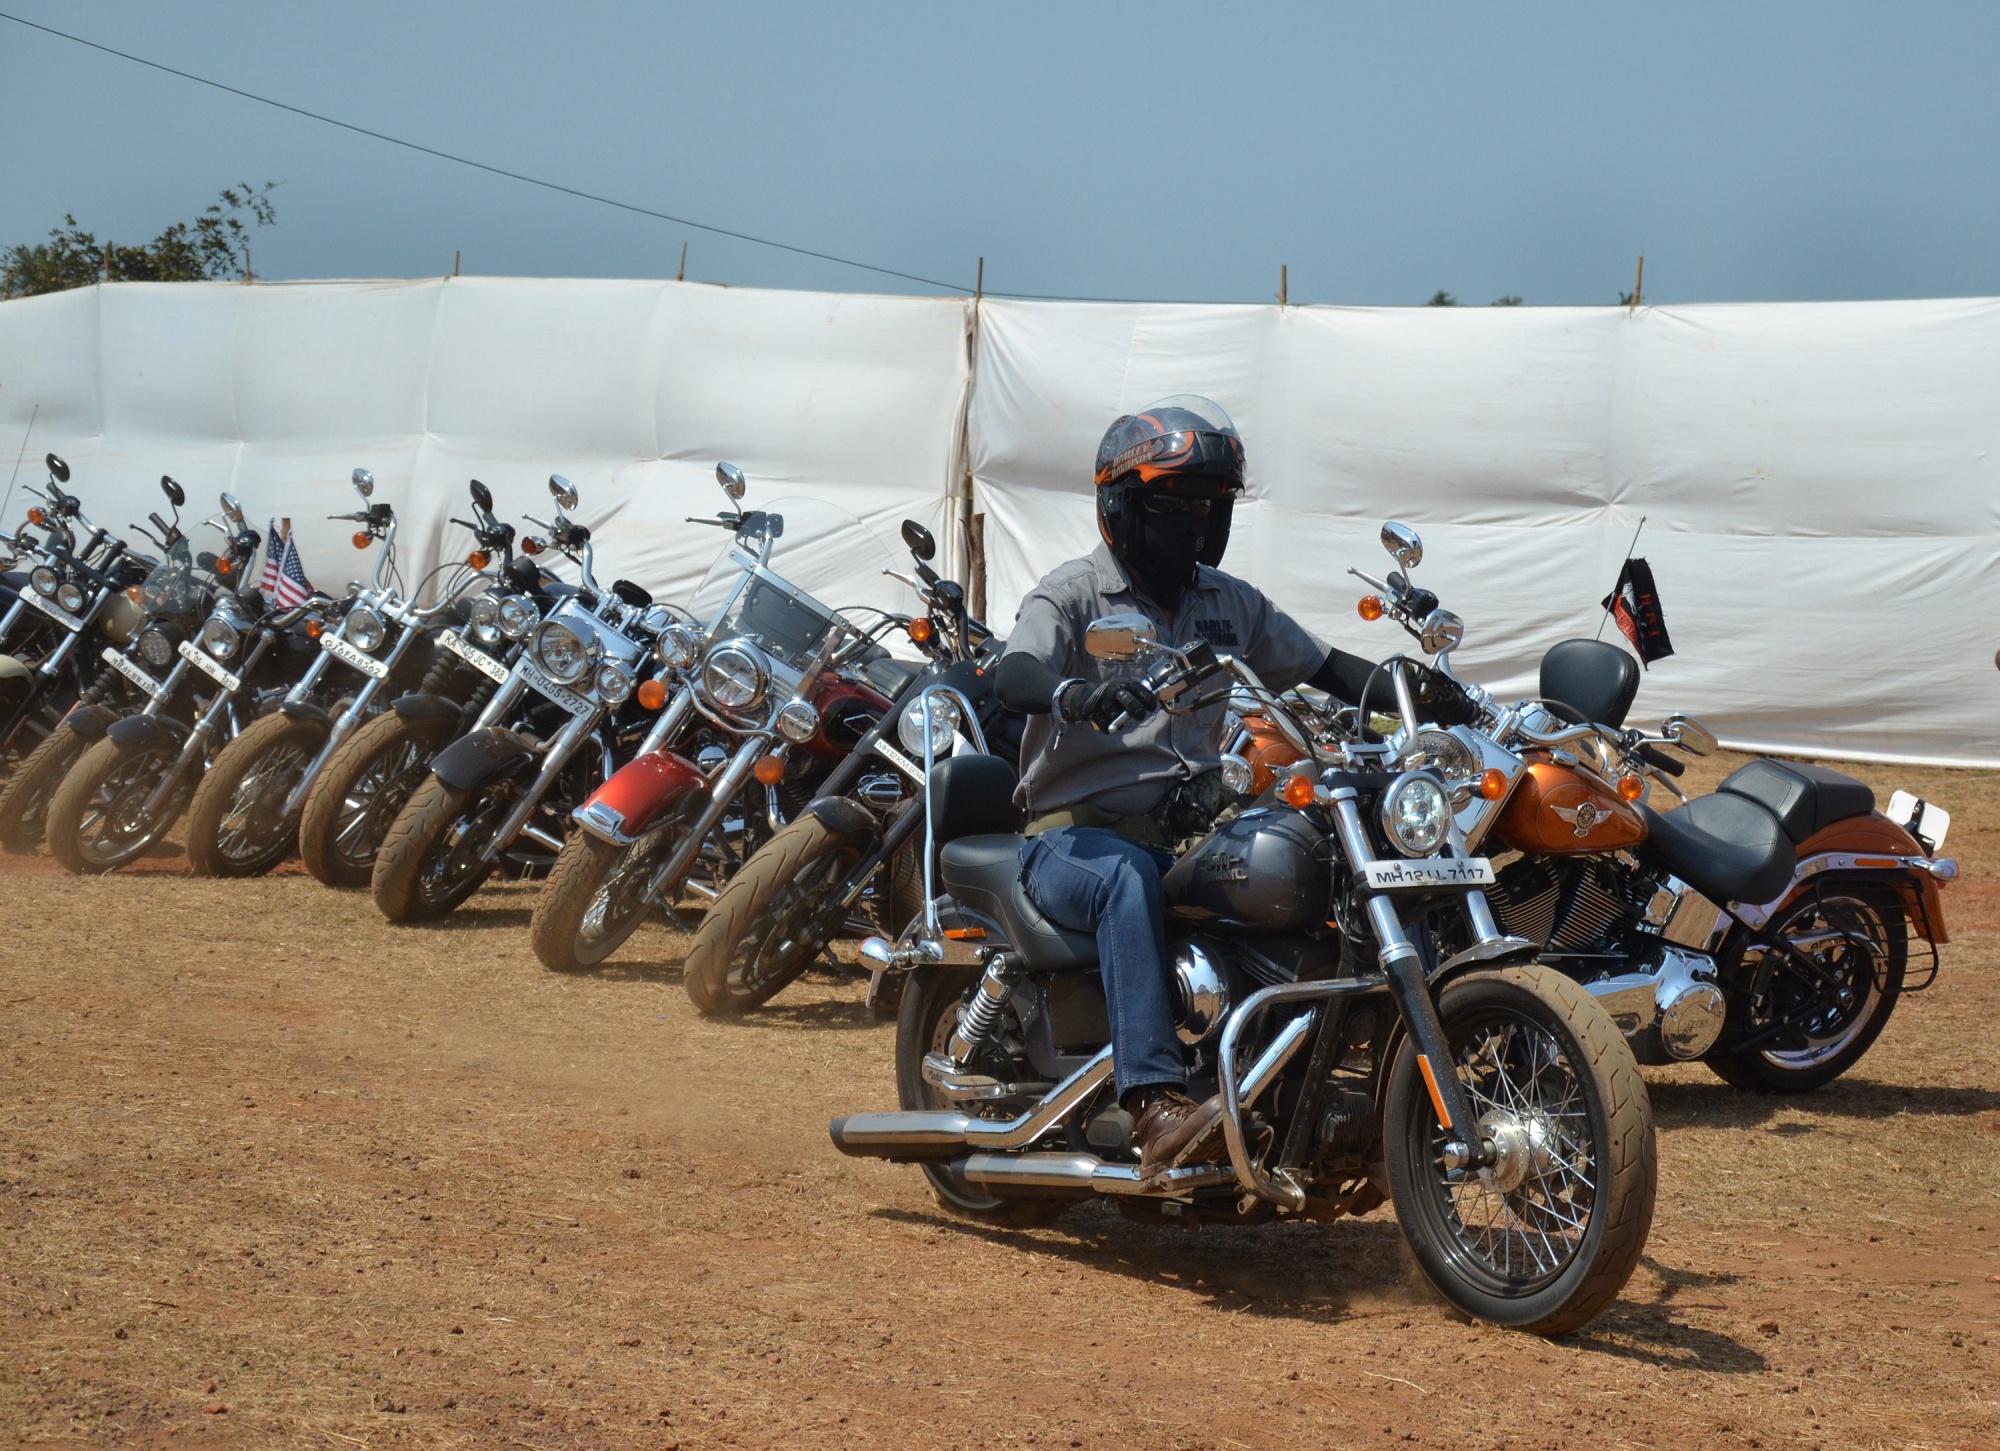 A motorcyclist drives a Harley-Davidson motor-cycle past a row of Harleys on display in Goa.